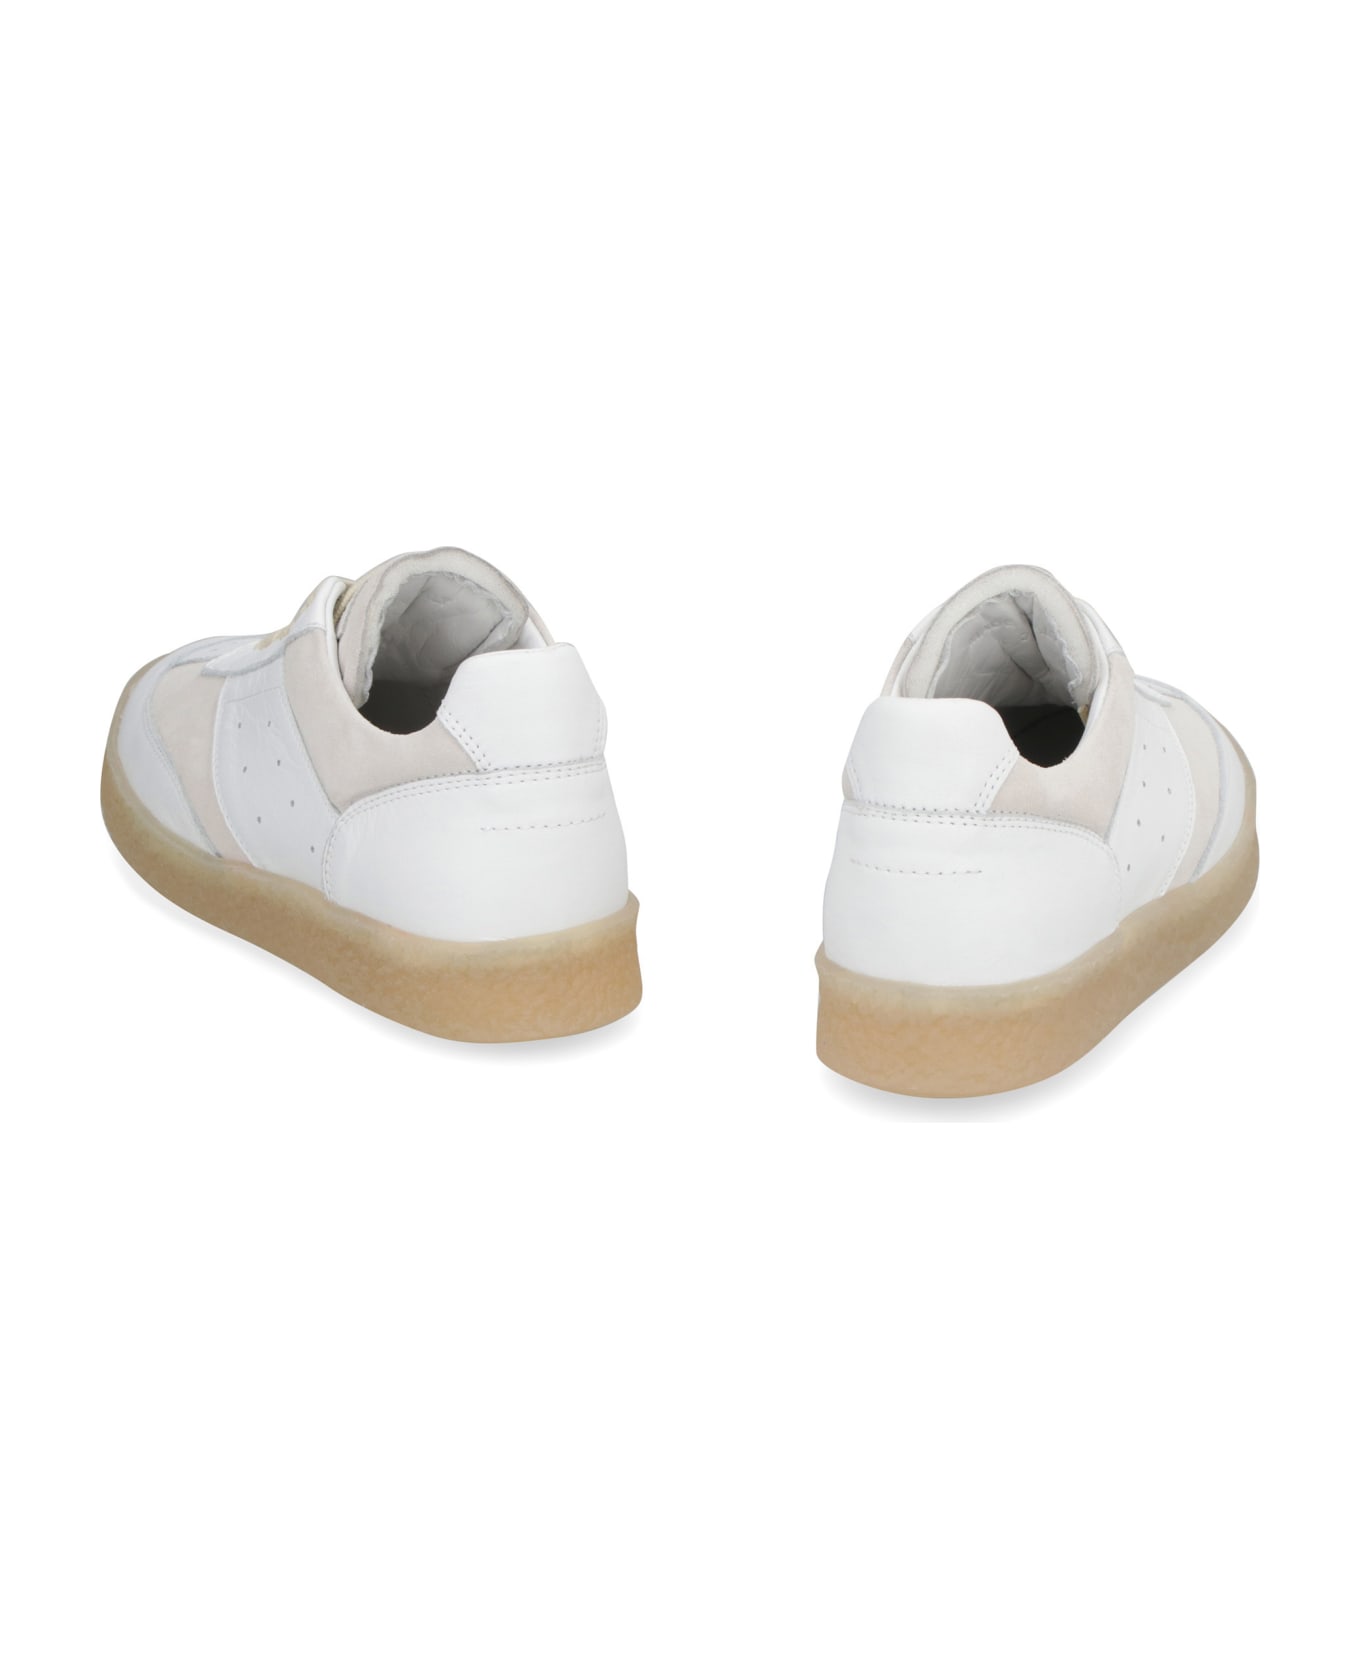 MM6 Maison Margiela Leather And Suede Sneakers - White